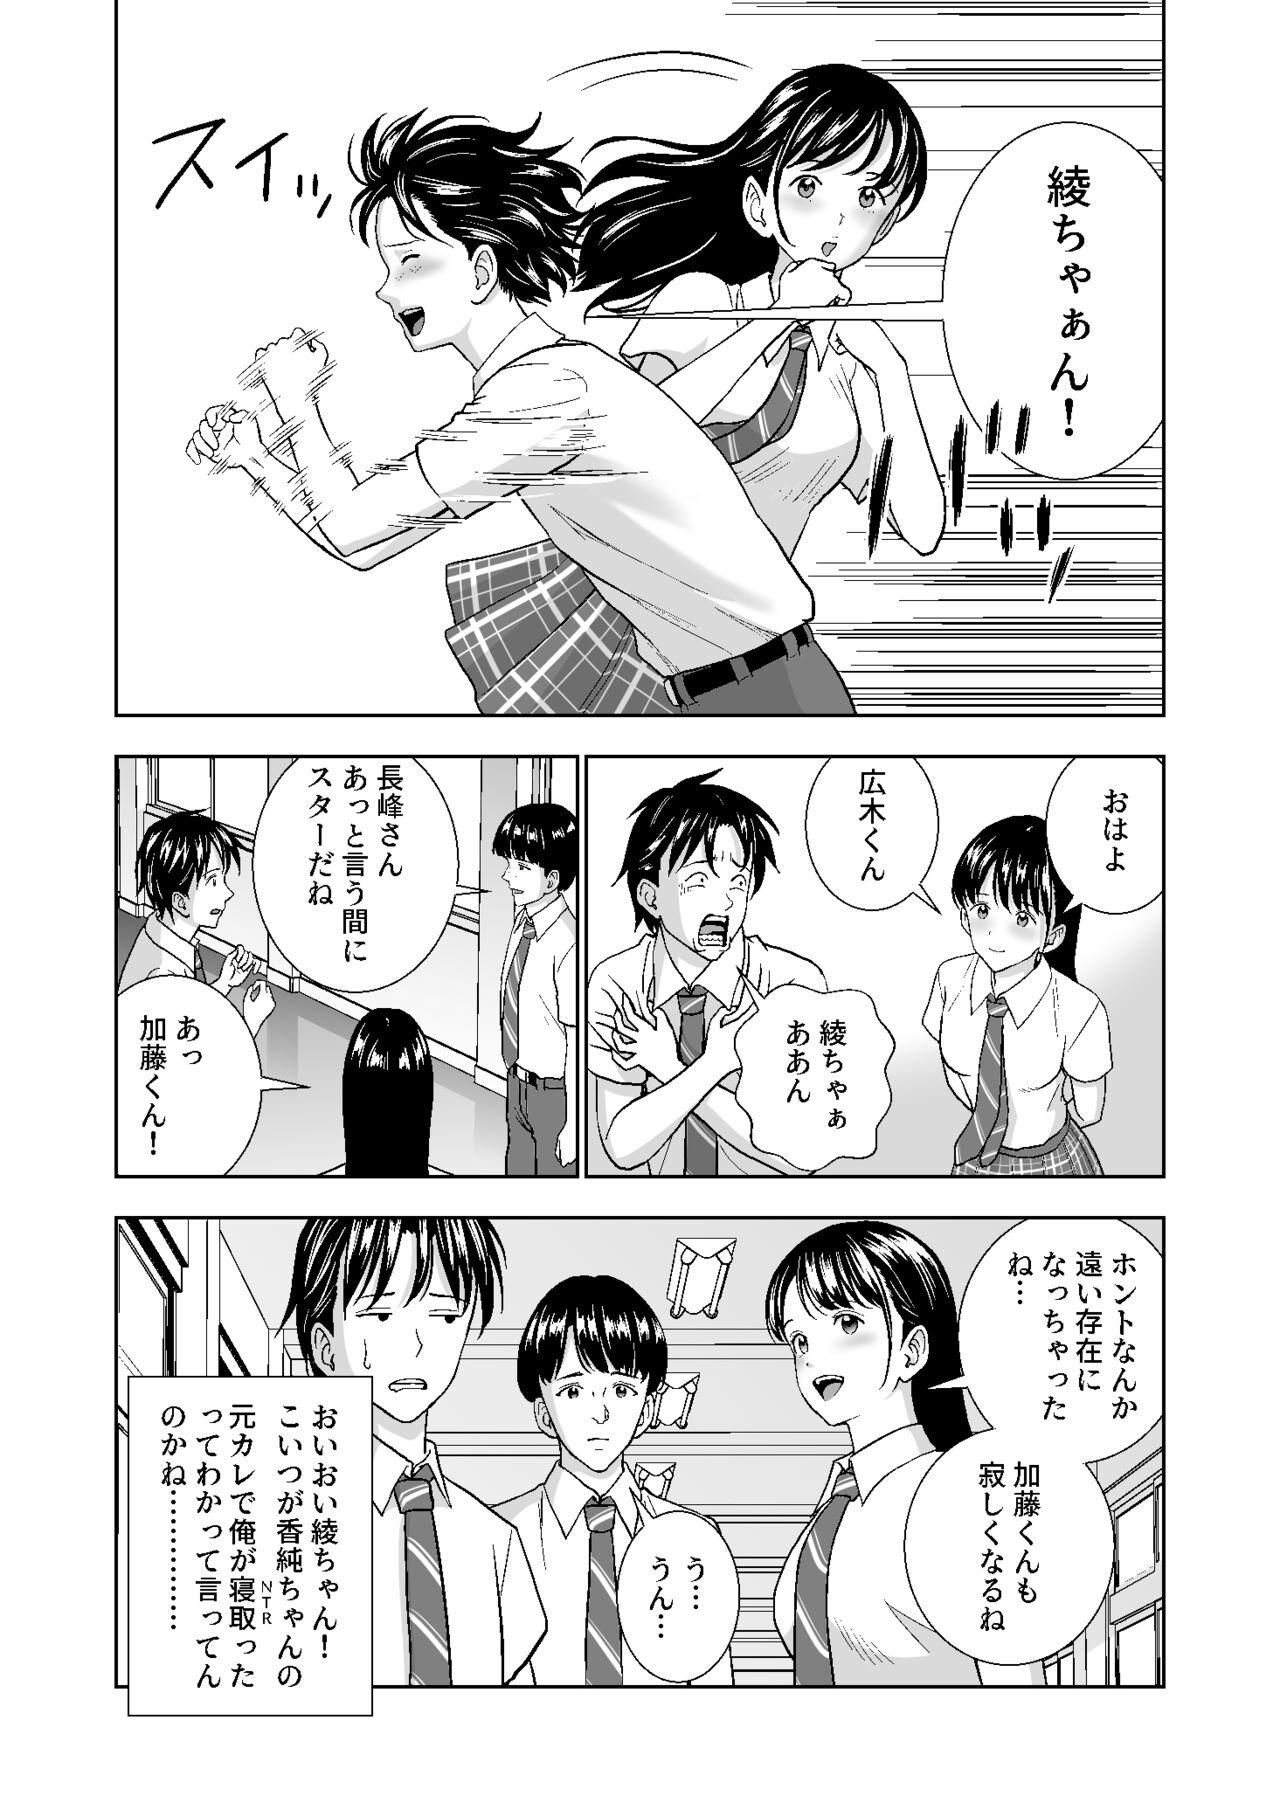 Animation 春くらべ4 - Original Firsttime - Page 6